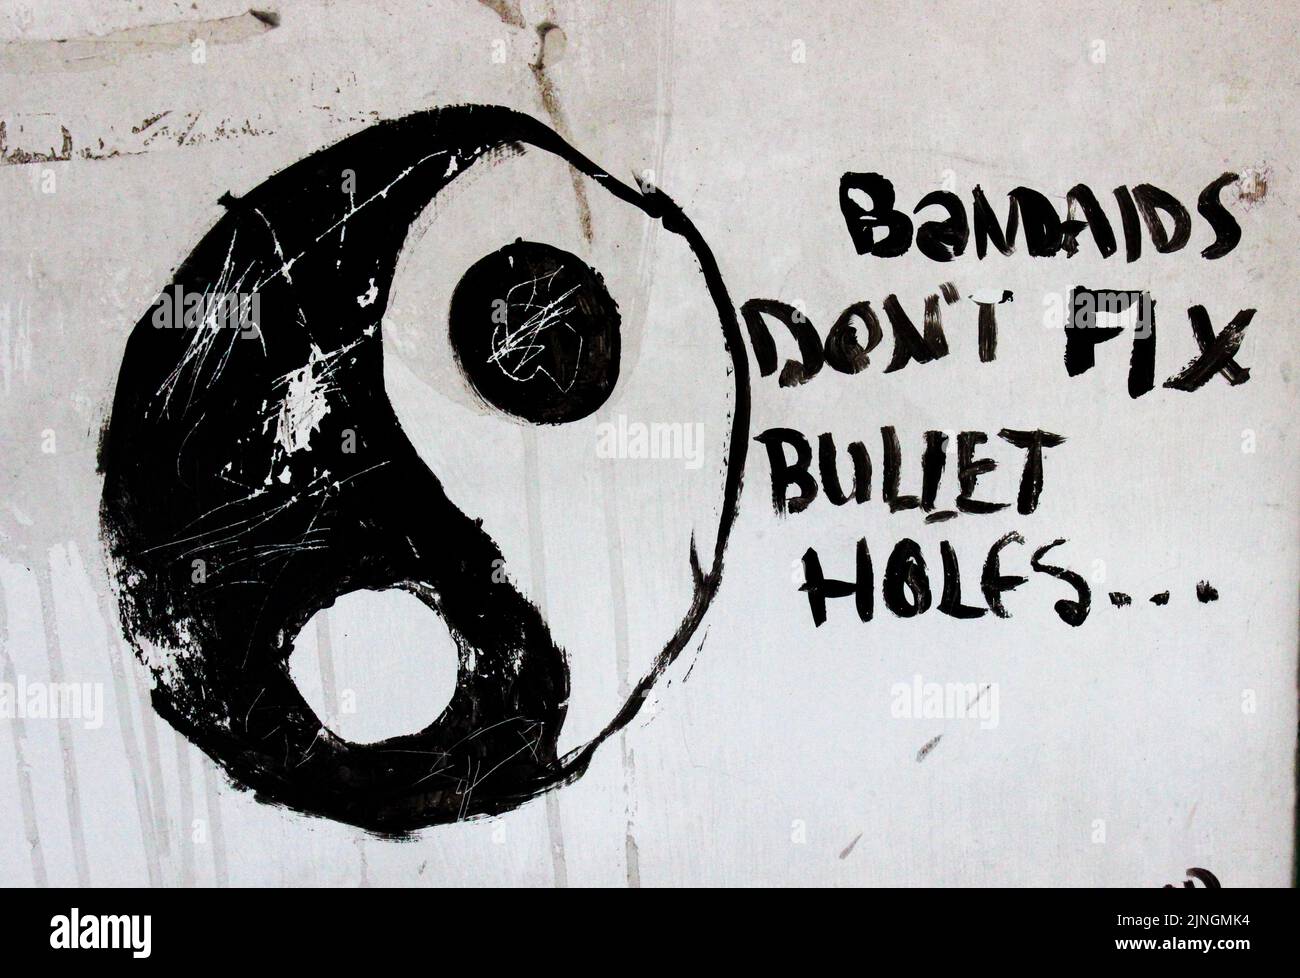 A yin and yang symbol with an anti-war Bandaids don't fix bullet holes quote Stock Photo